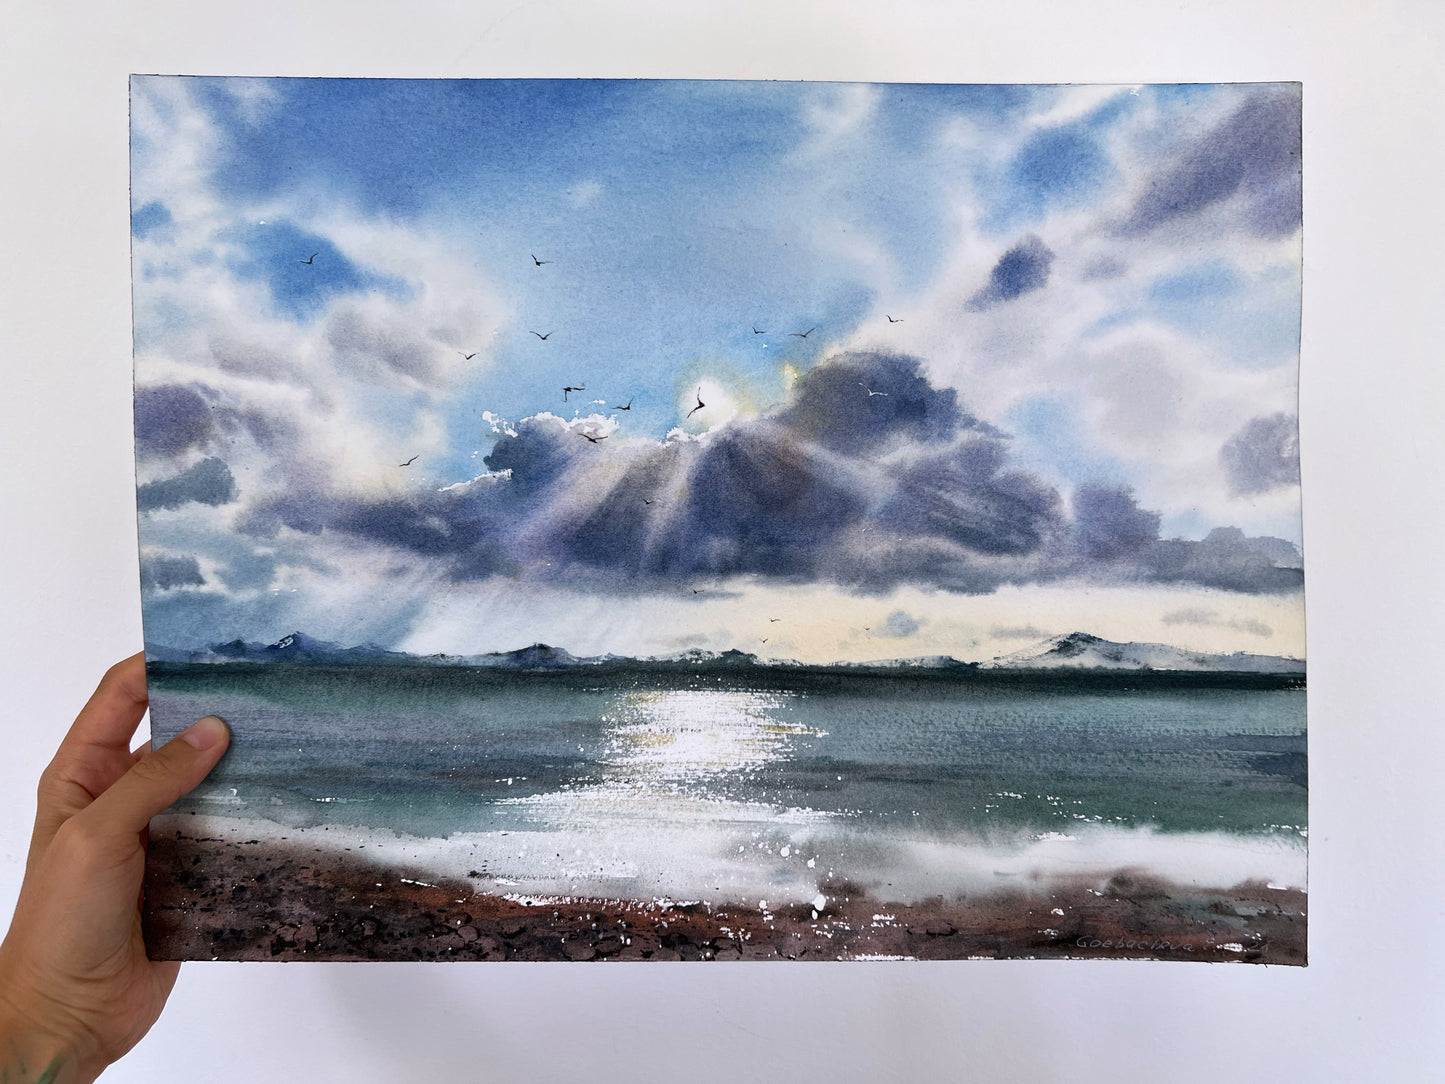 Original Beach Painting Watercolor, Coastal Artwork, Sea Wave, Seaside Wall Decor, Seascape with Clouds and Seagulls, Gift